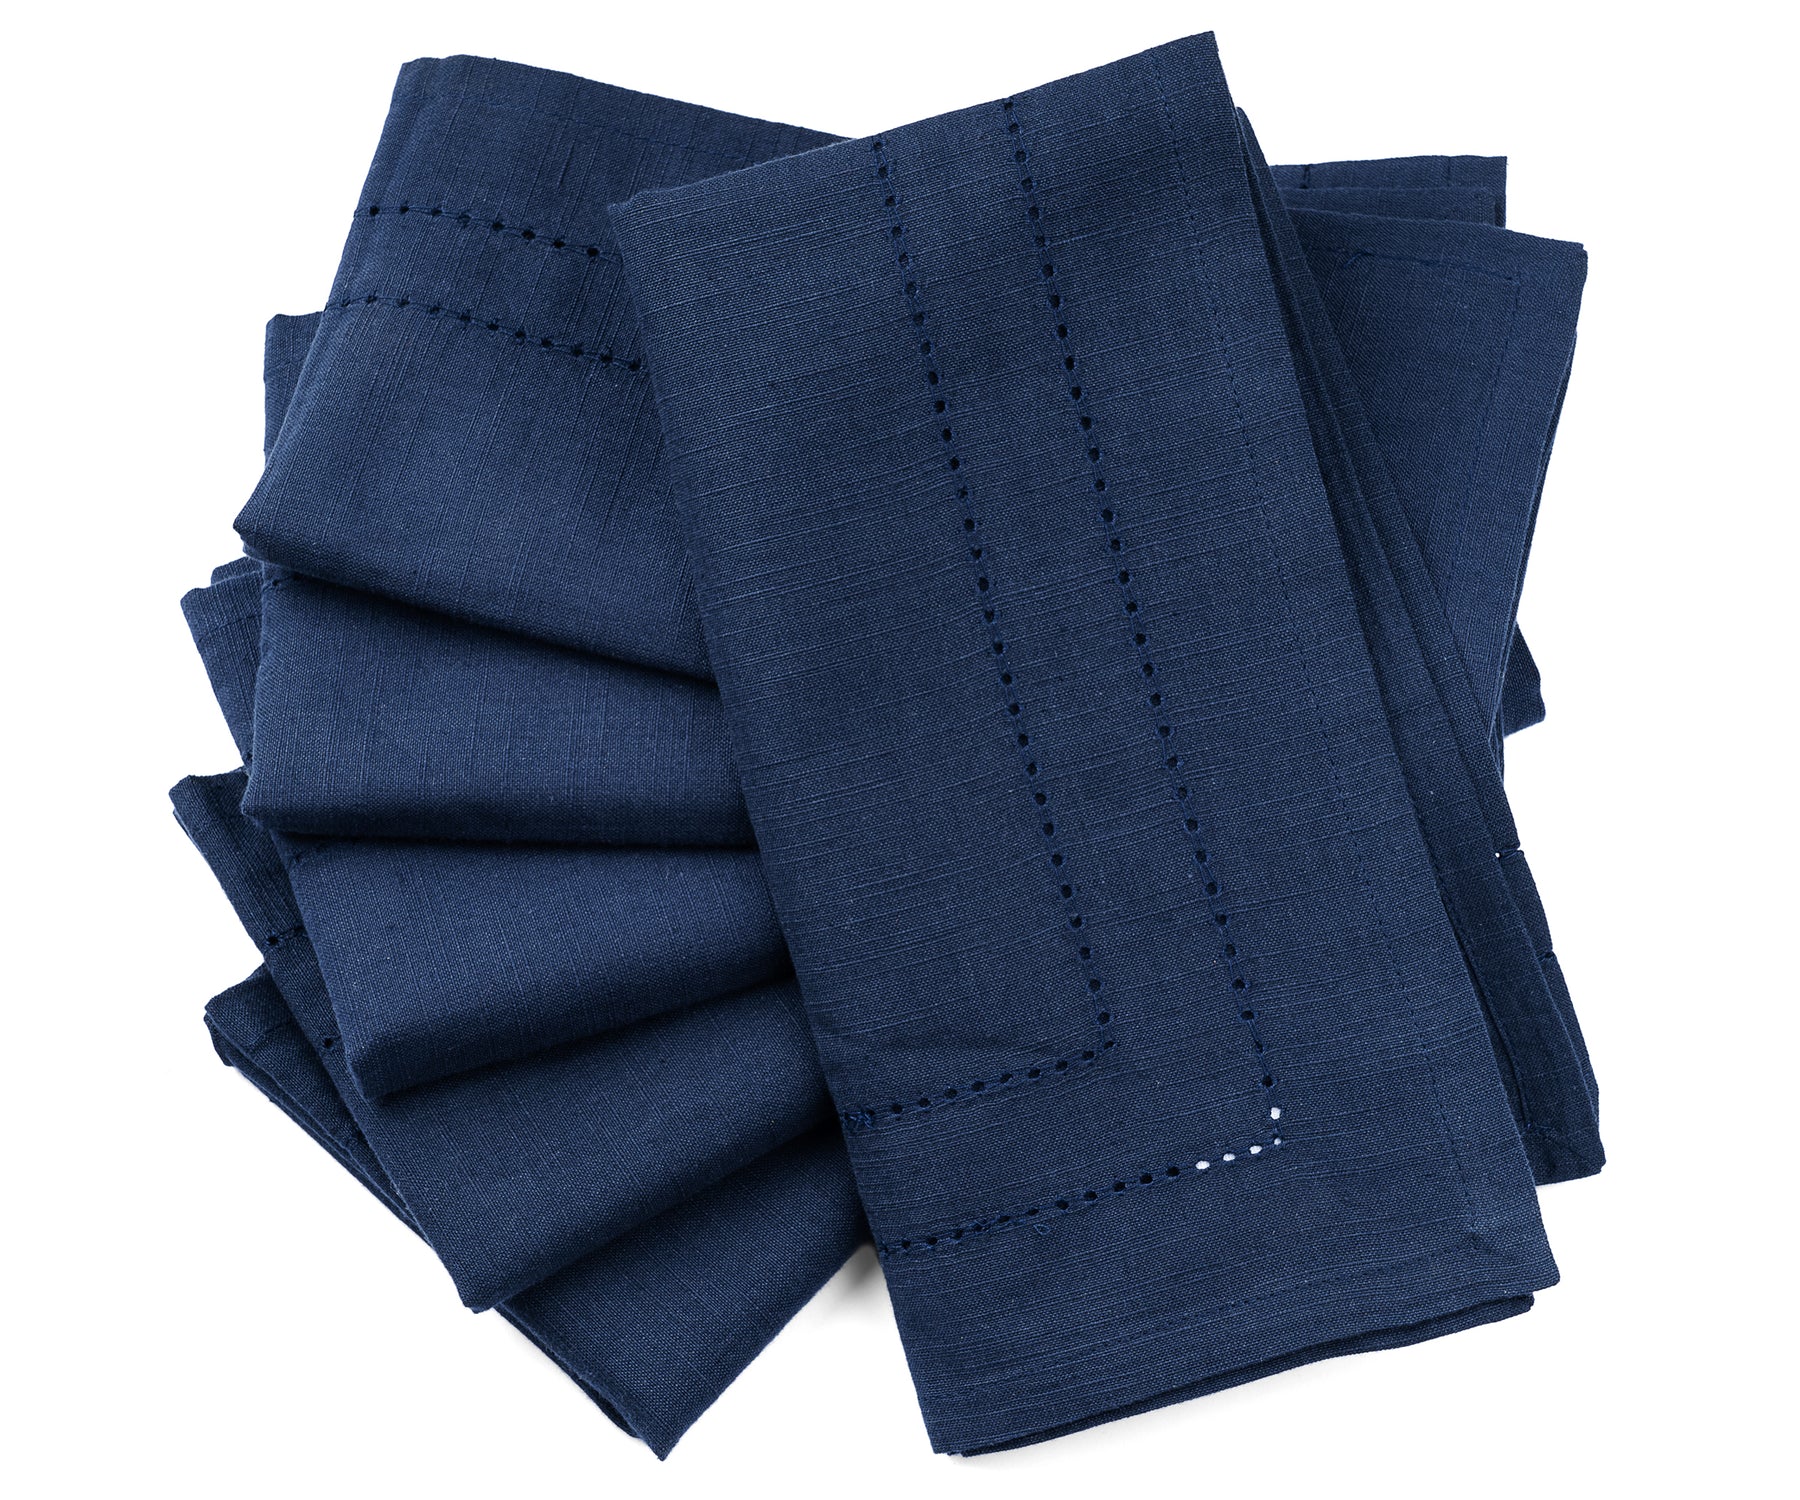 Close-up of navy blue double hemstitch cloth napkins with white hemstitching